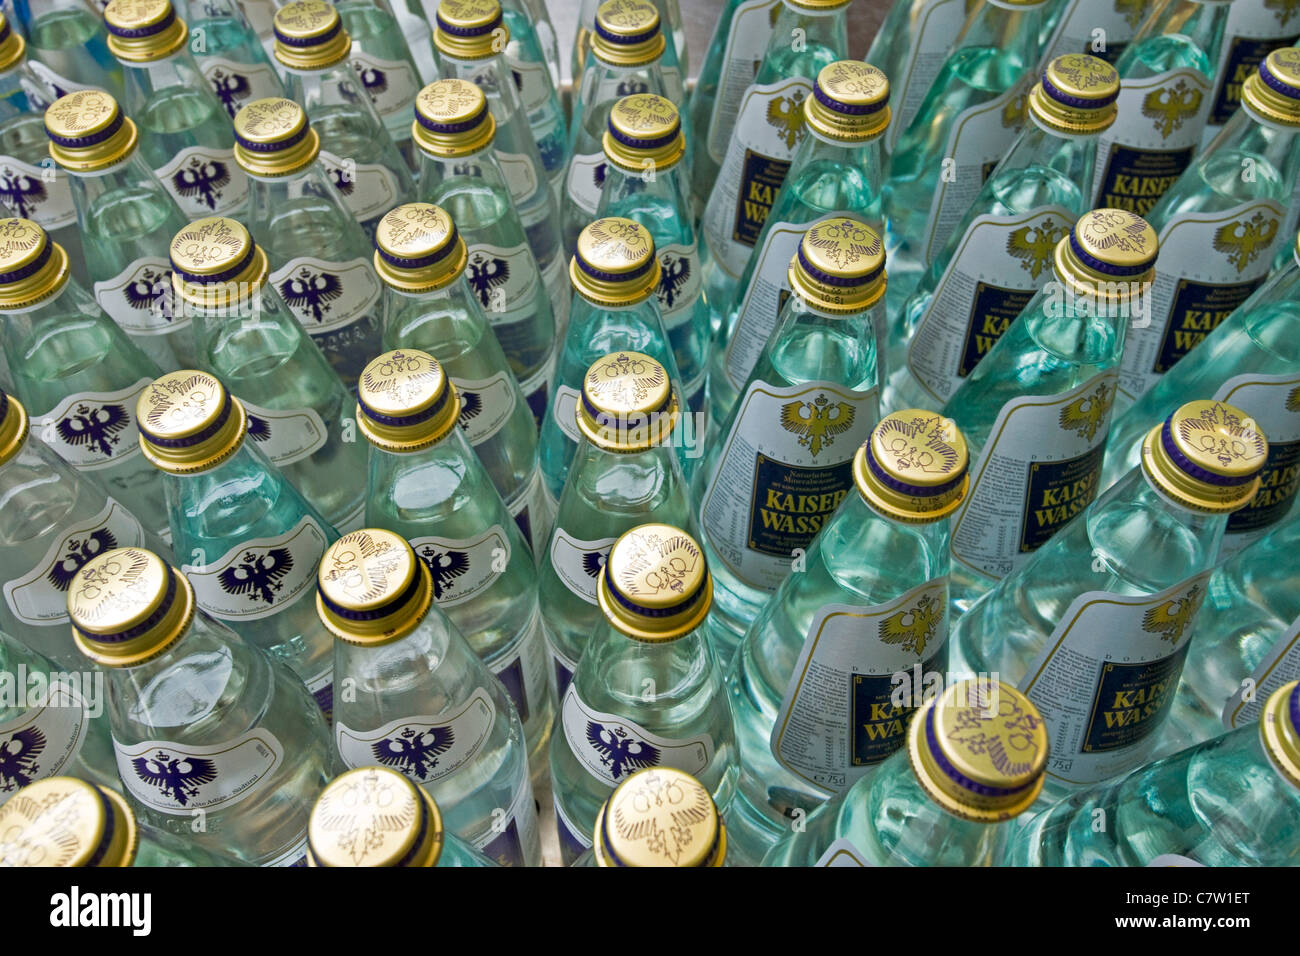 Mineral water bottles Stock Photo